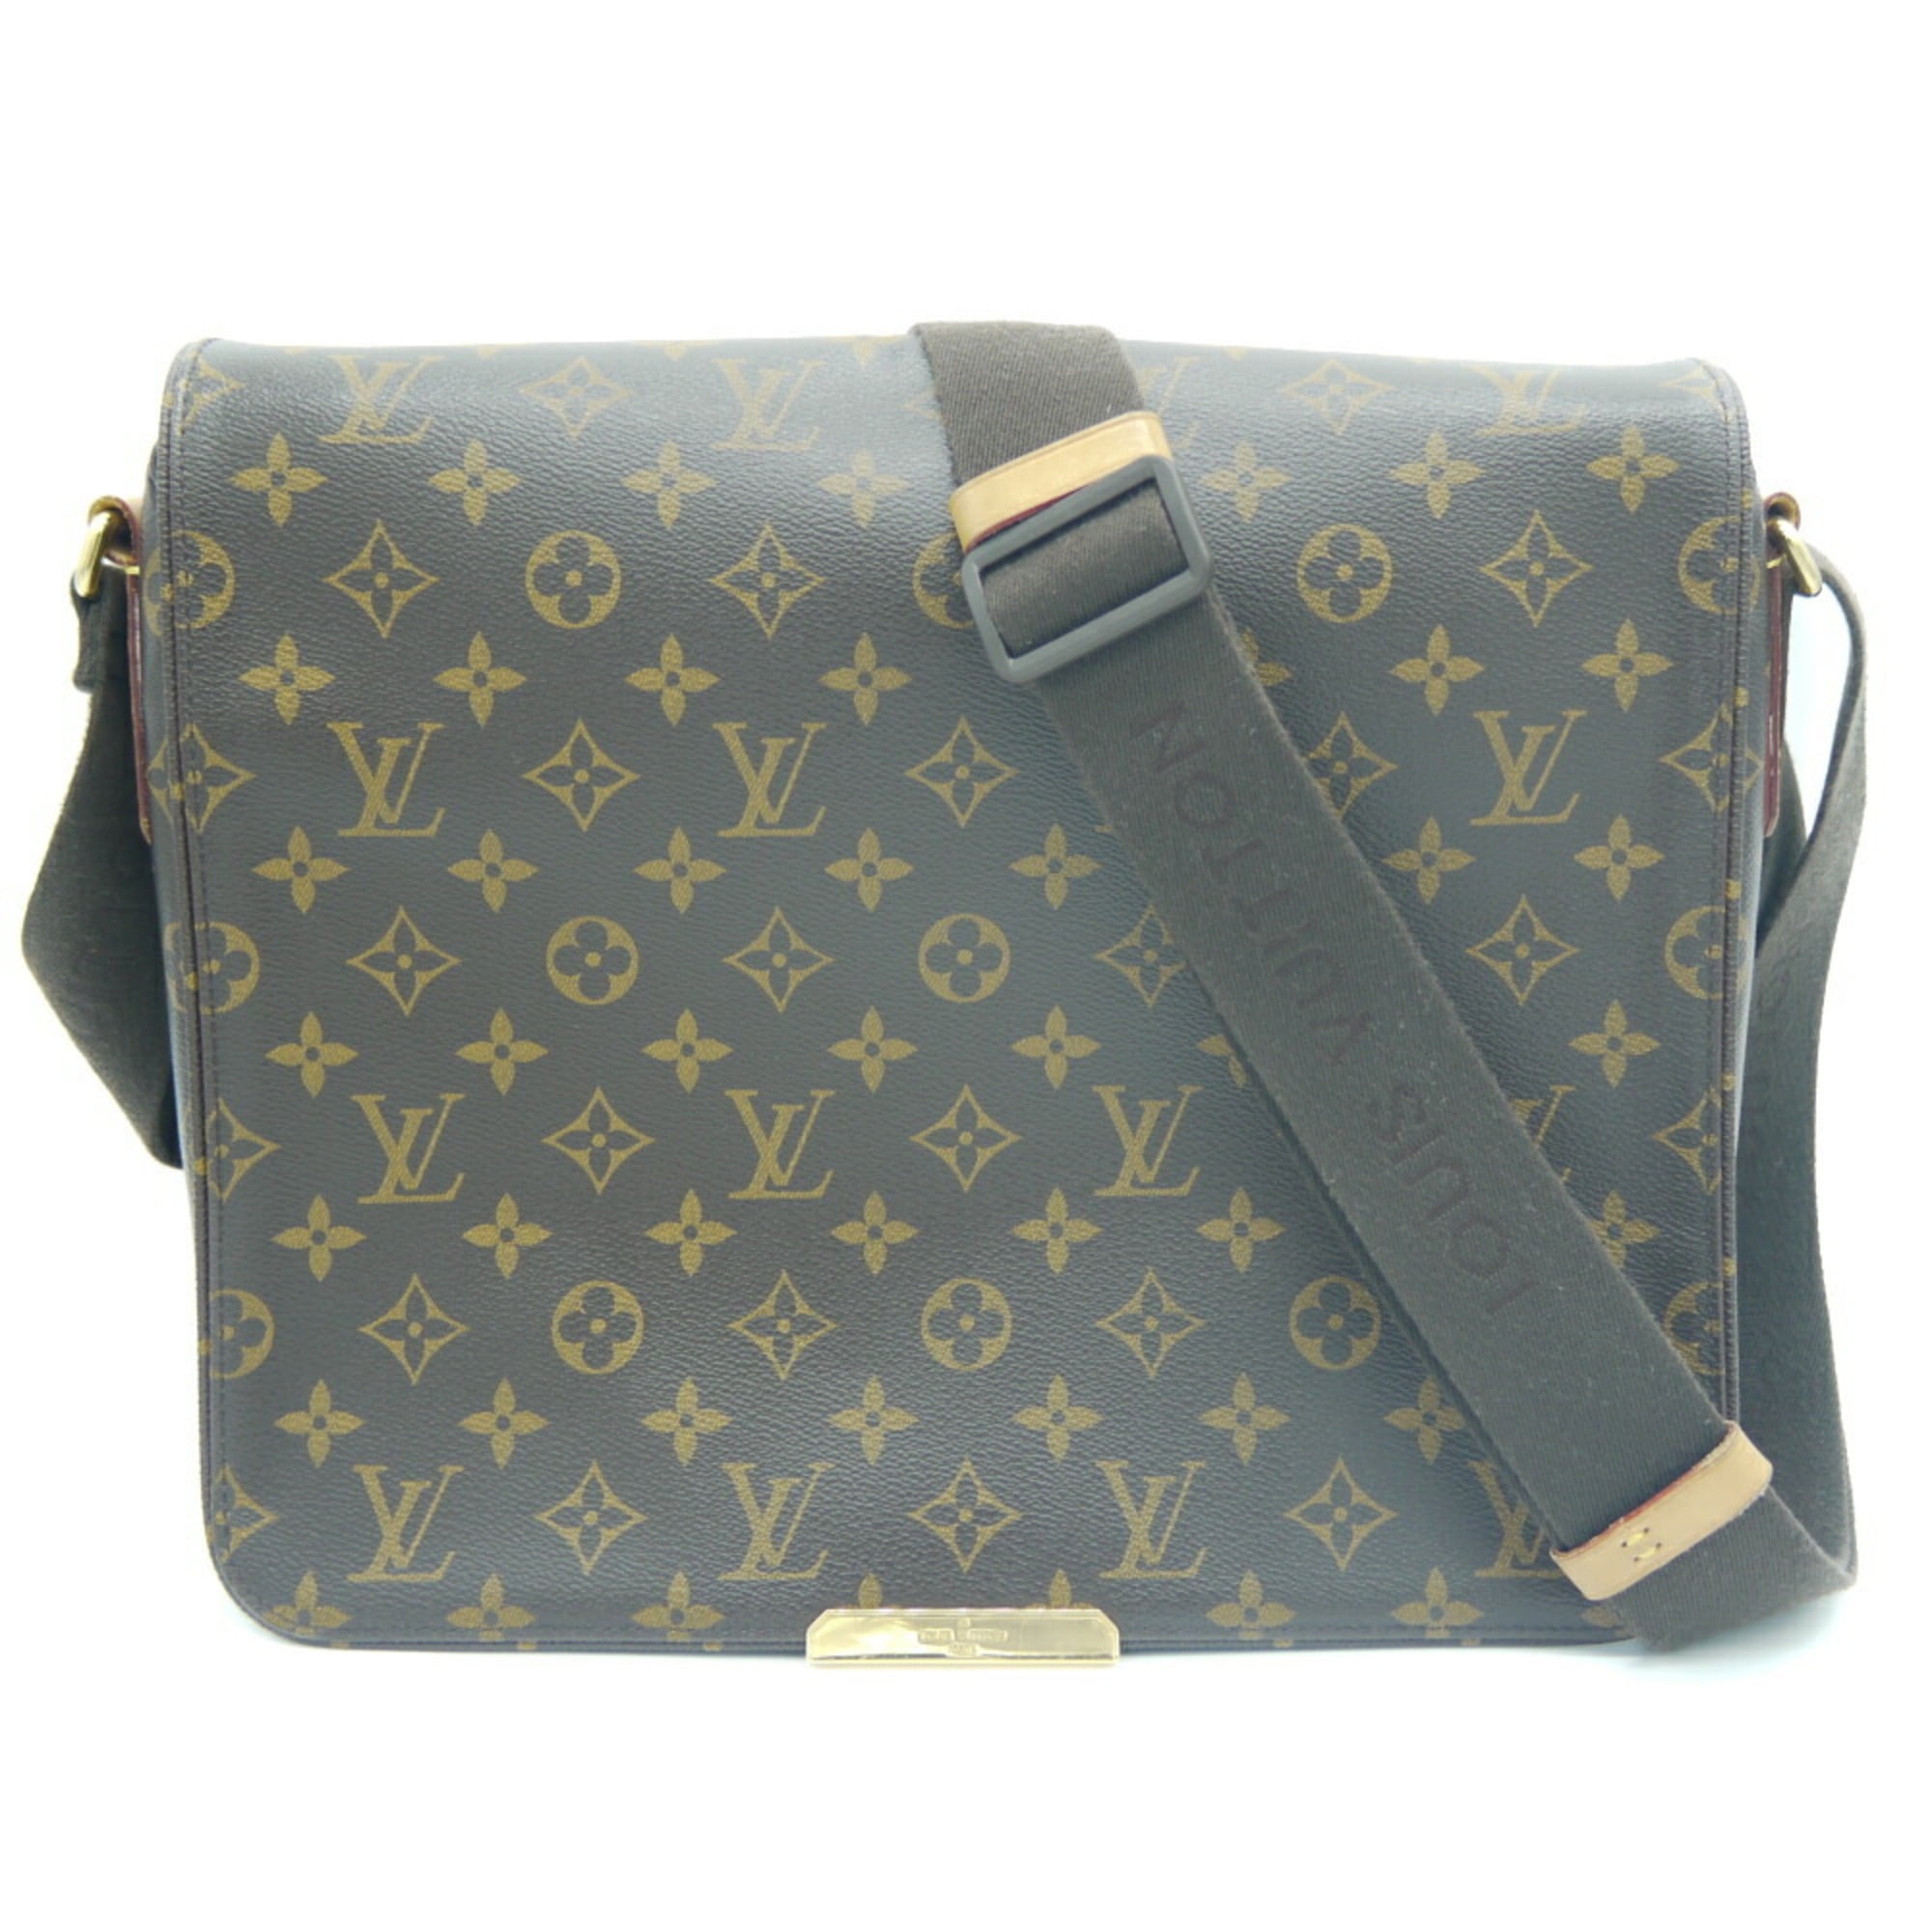 Authenticated Used LOUIS VUITTON Louis Vuitton Valmy MM monogram